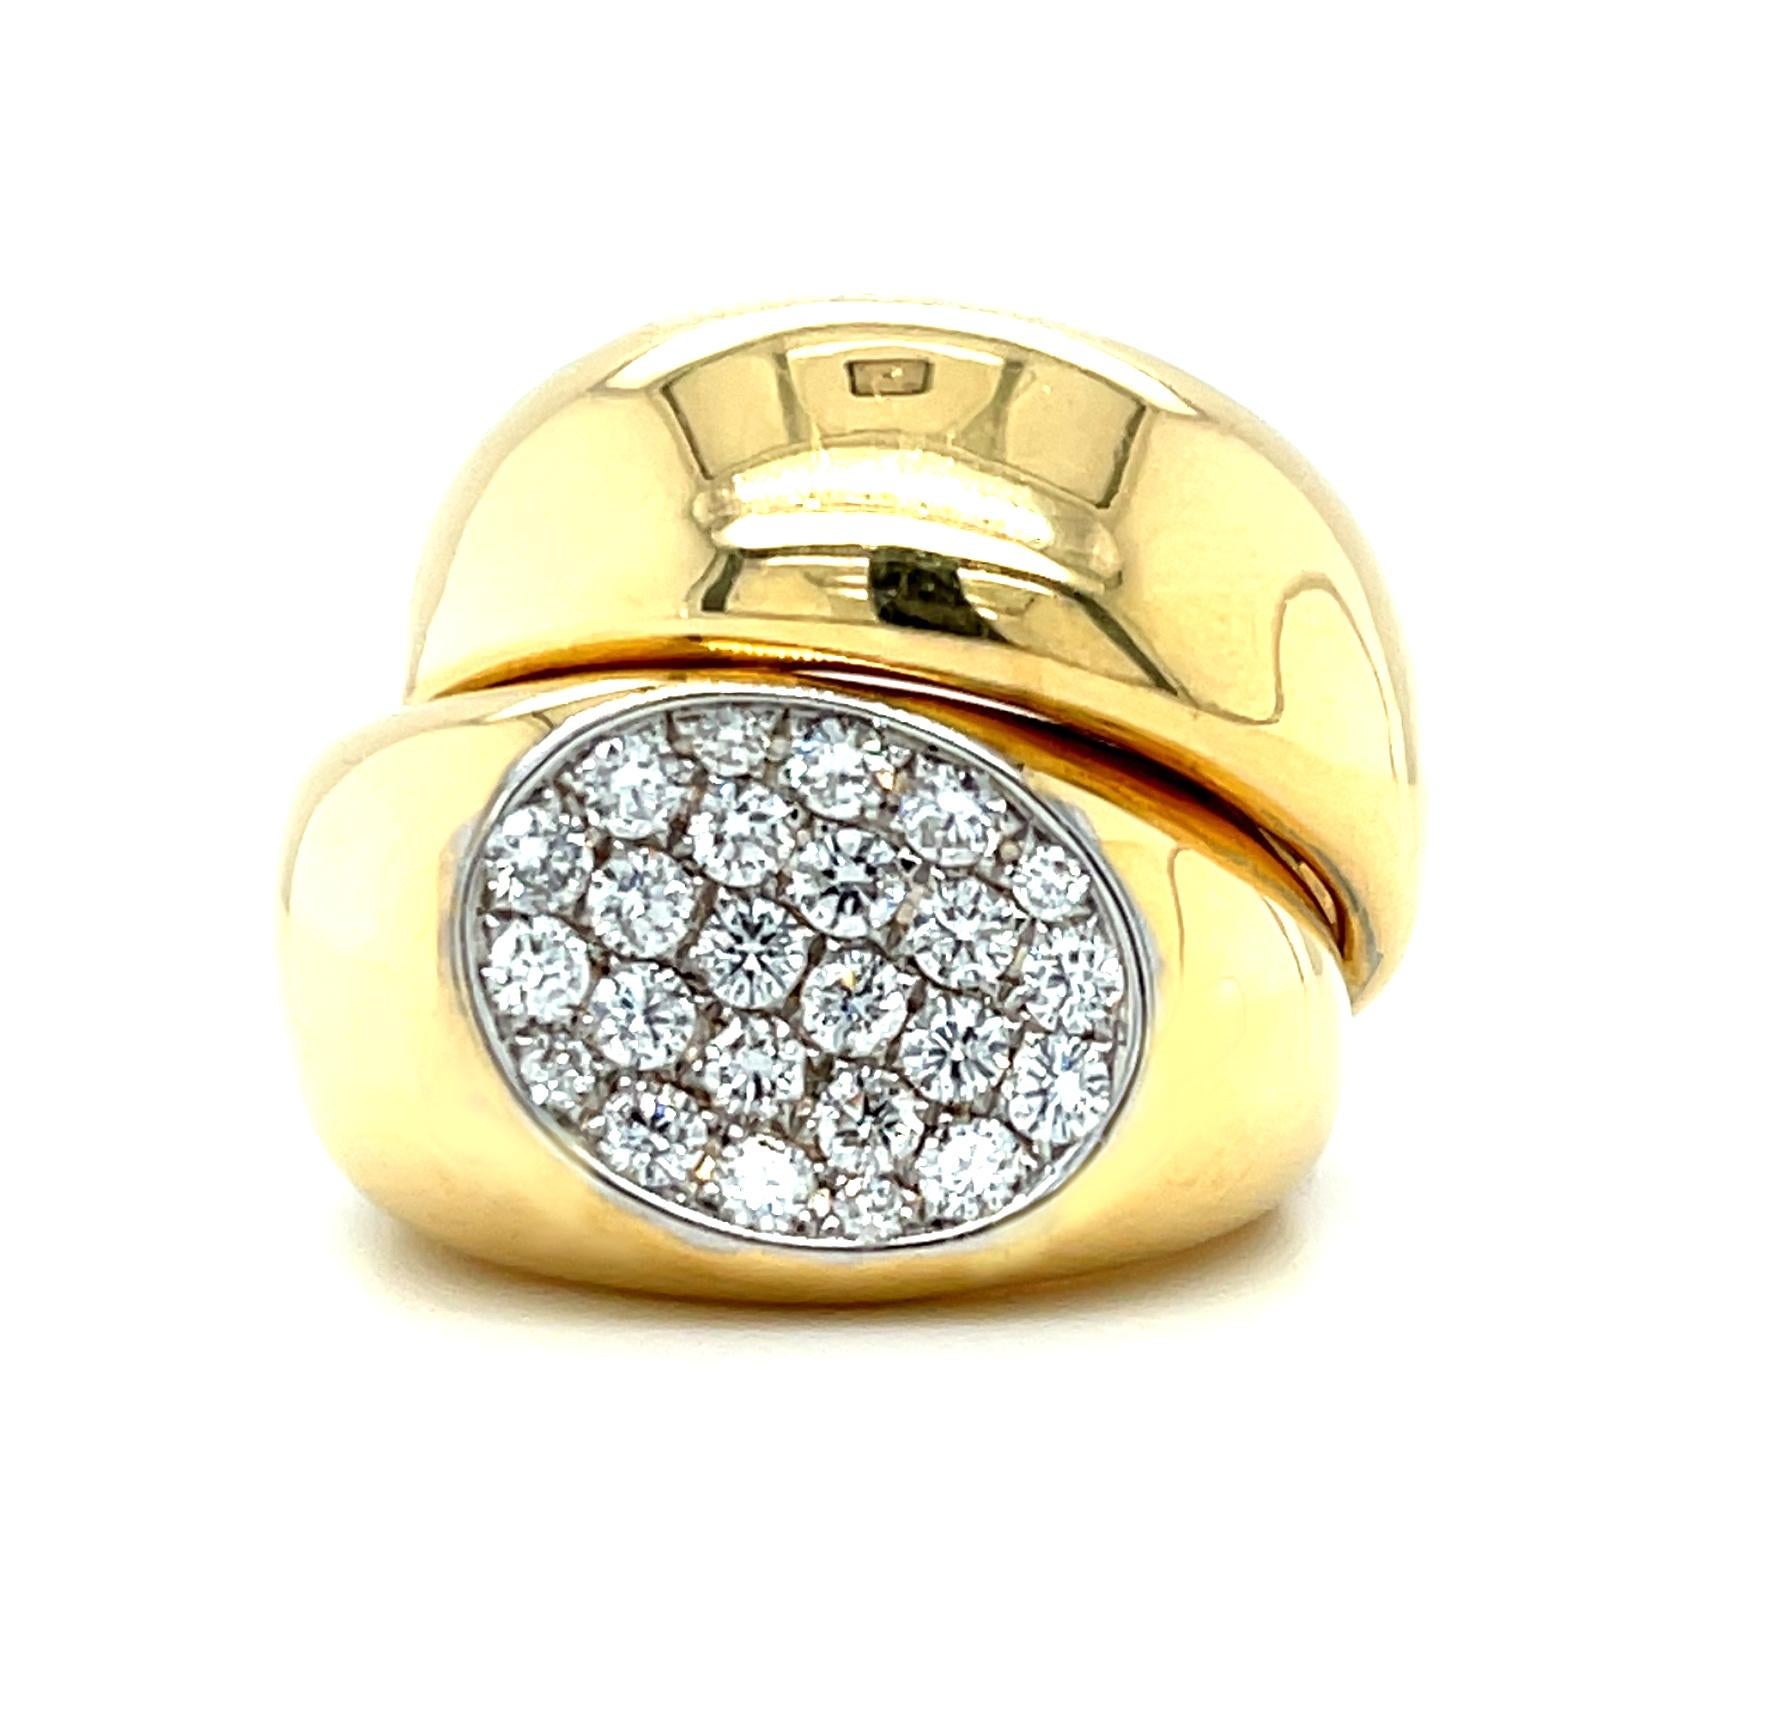 This uniquely stacked design yellow gold ring is large and bold! Talk about a 